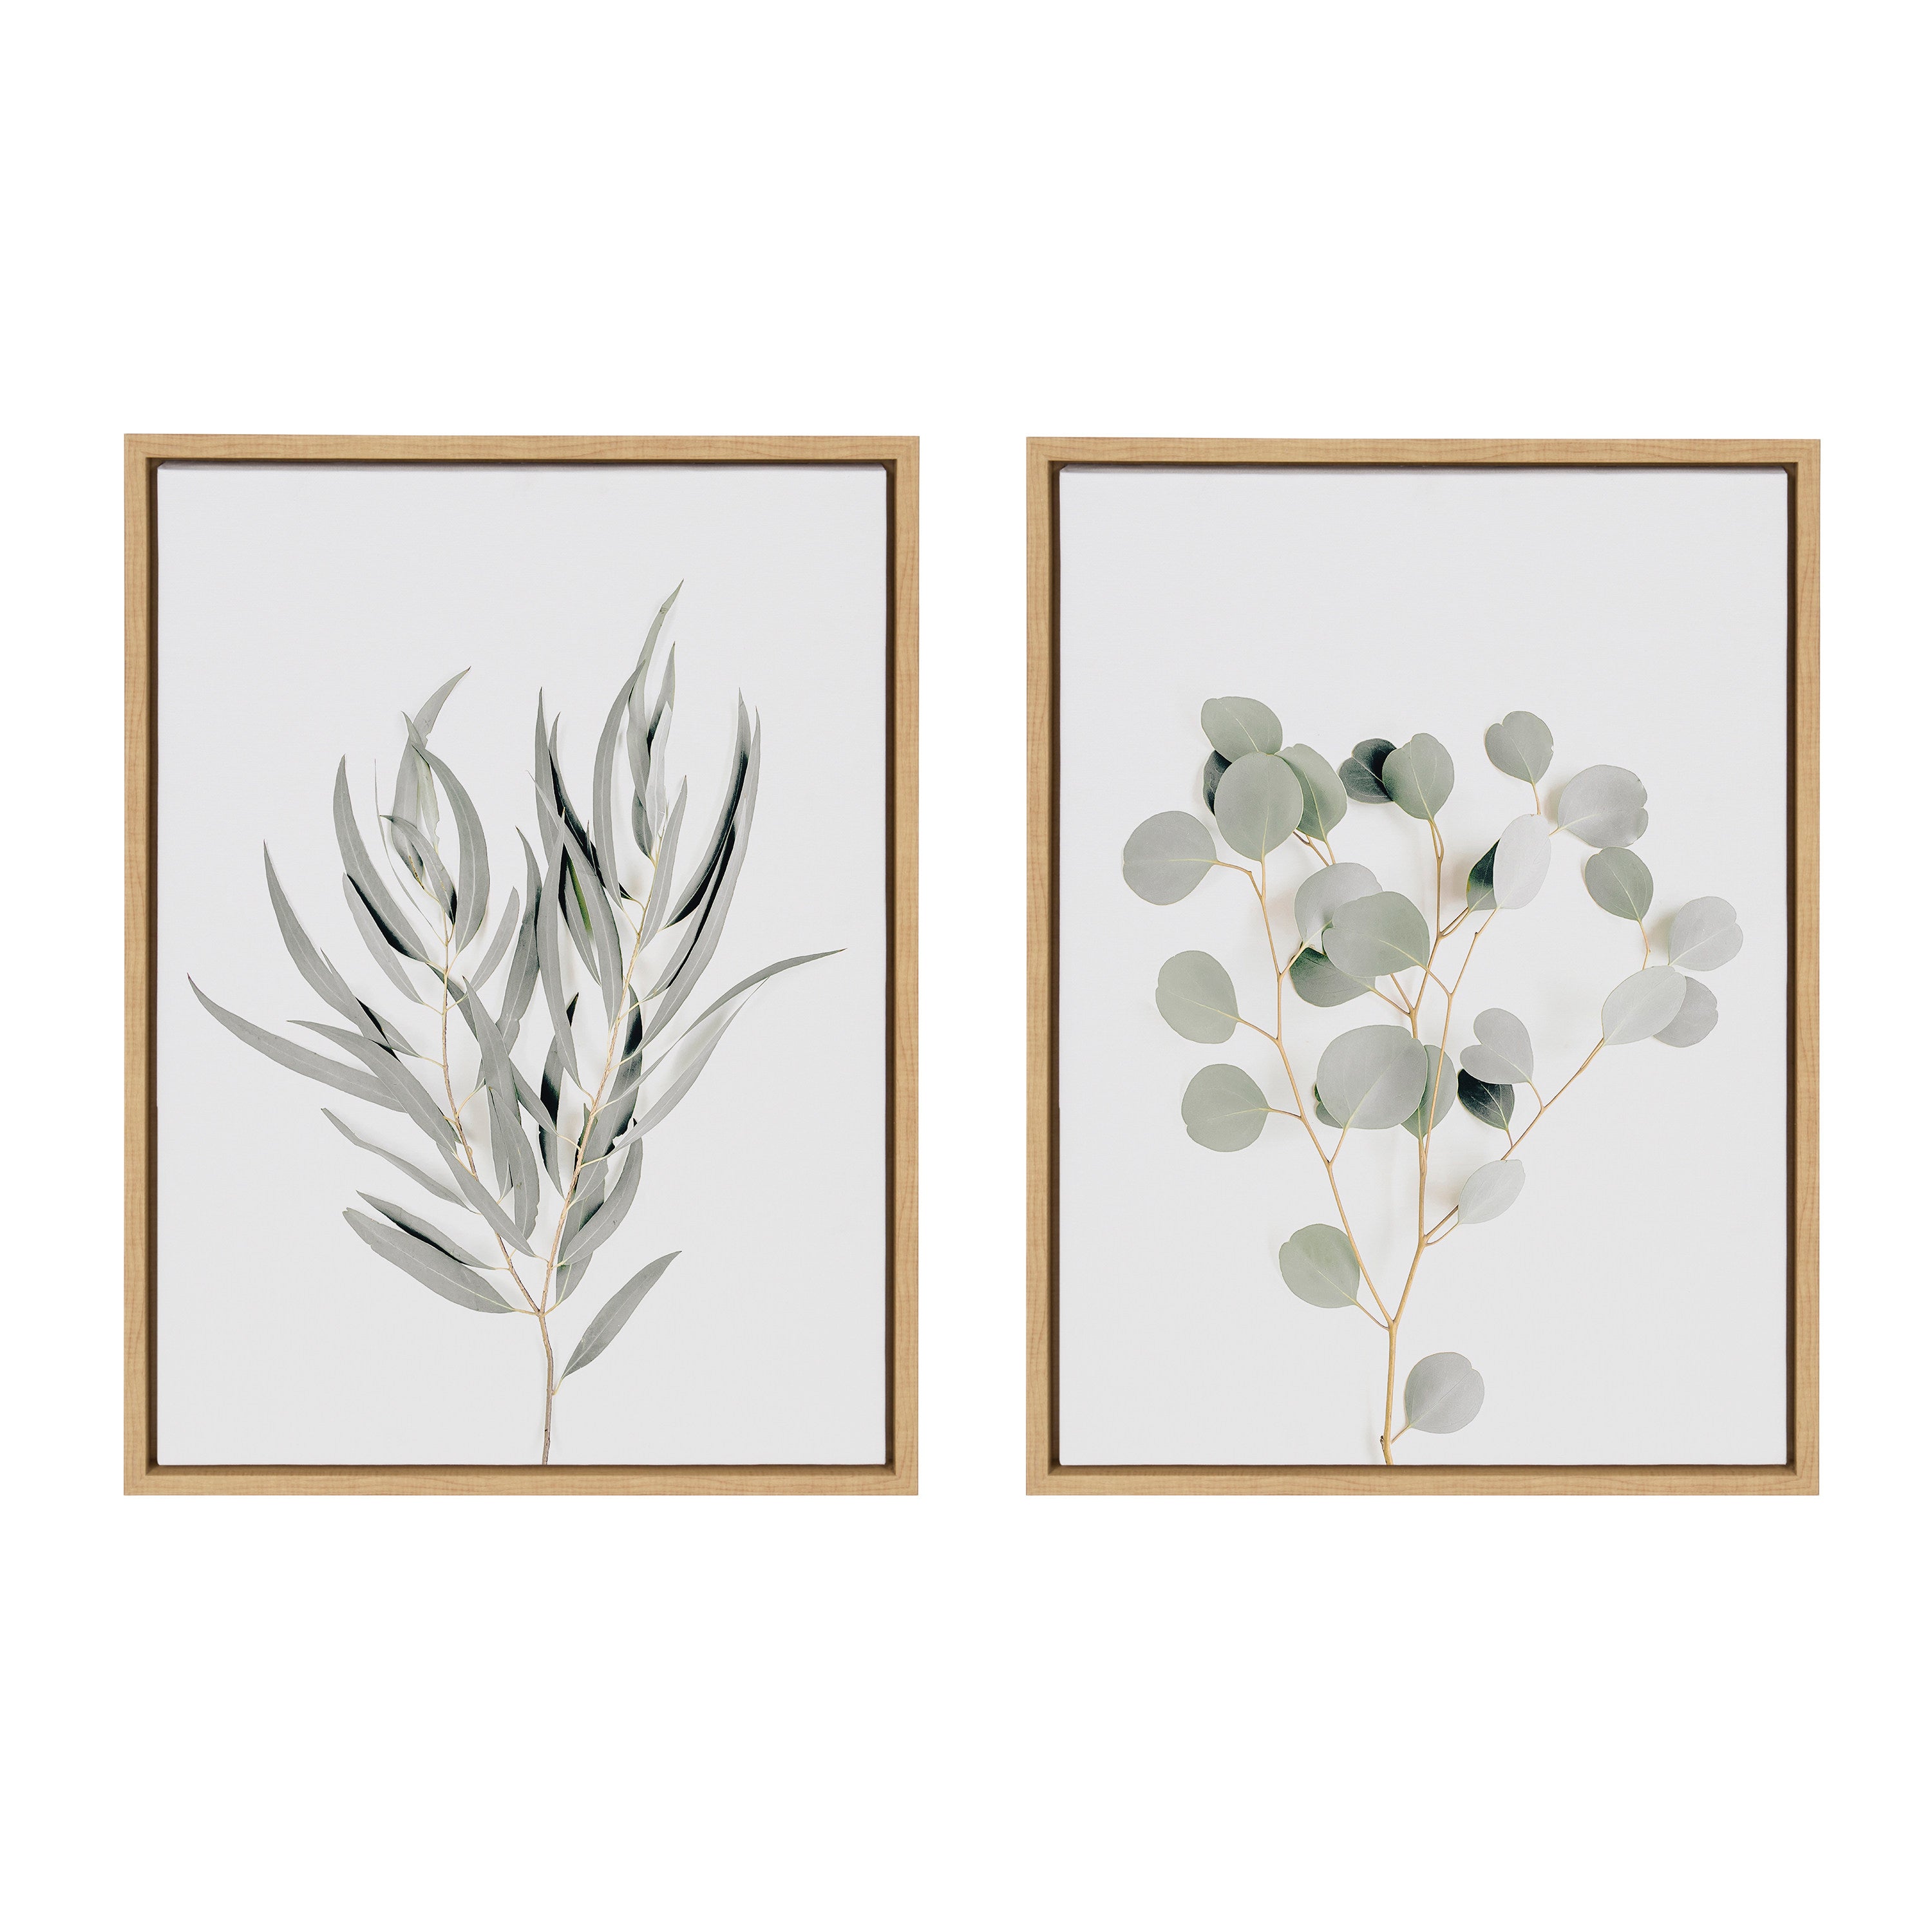 Sylvie Neutral Botanical 1 and 2 Framed Canvas Set by The Creative Bunch Studio